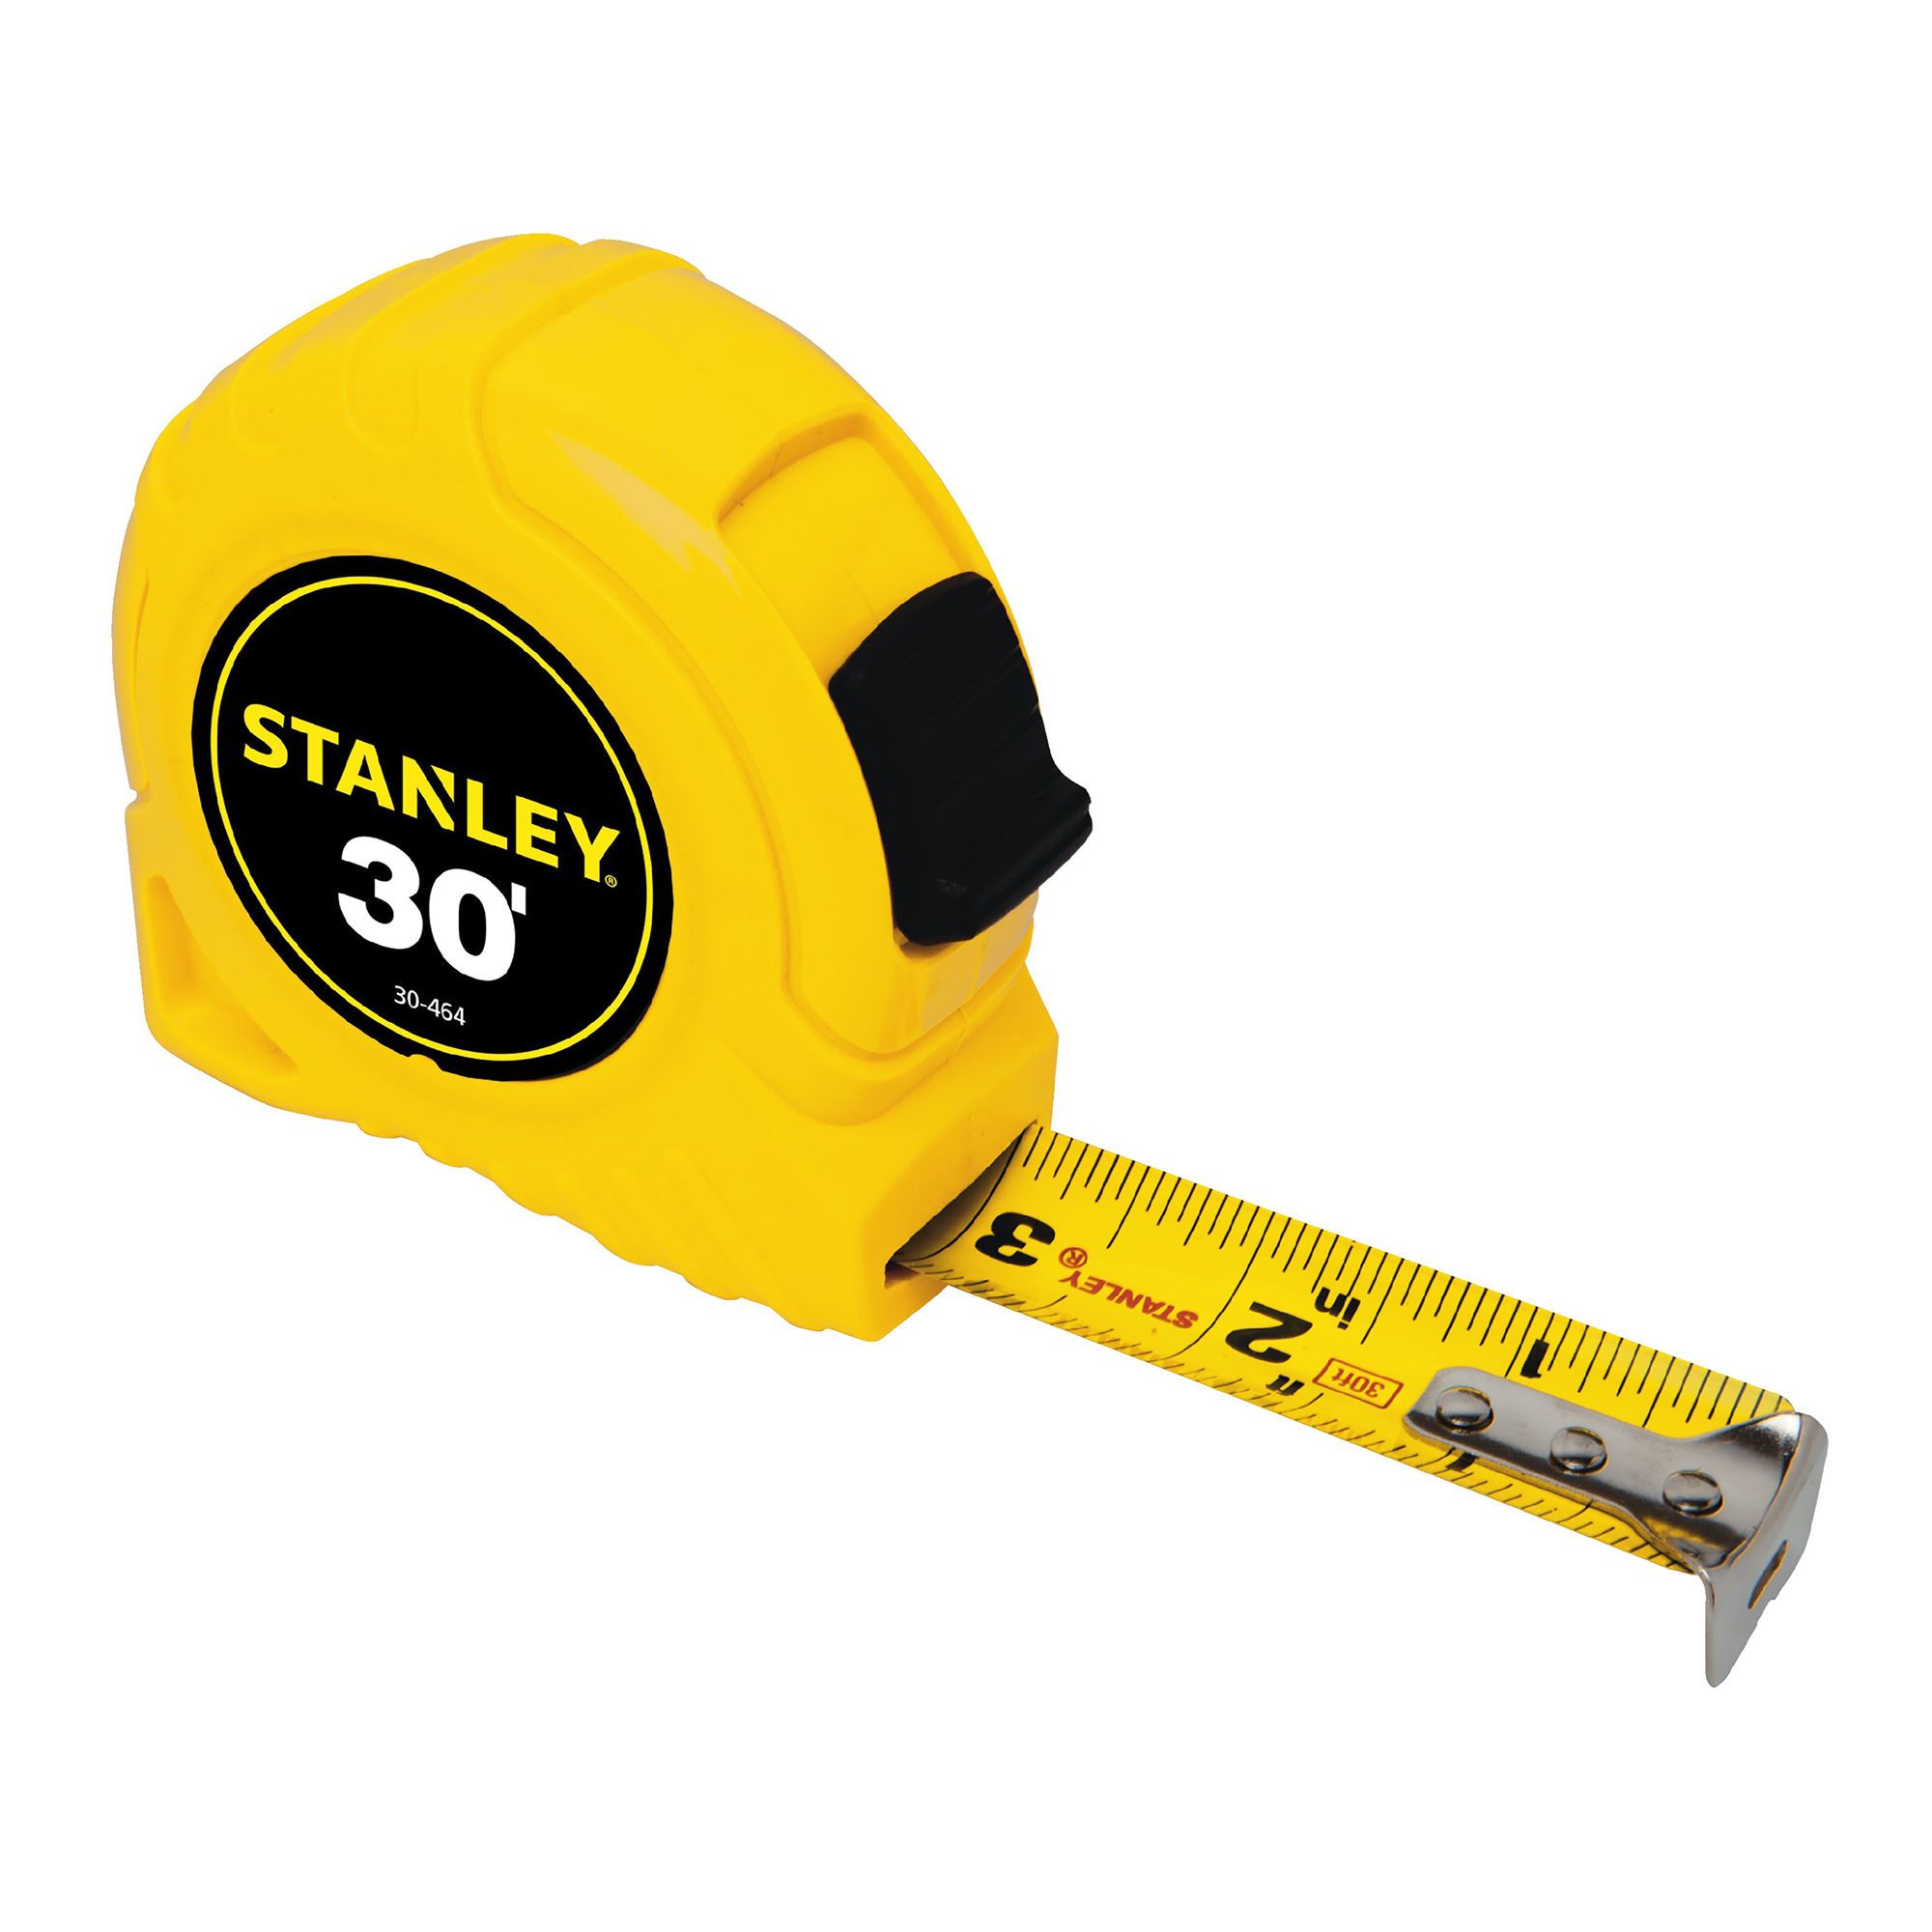 Measuring Tape - 1 x 30' from STANLEY